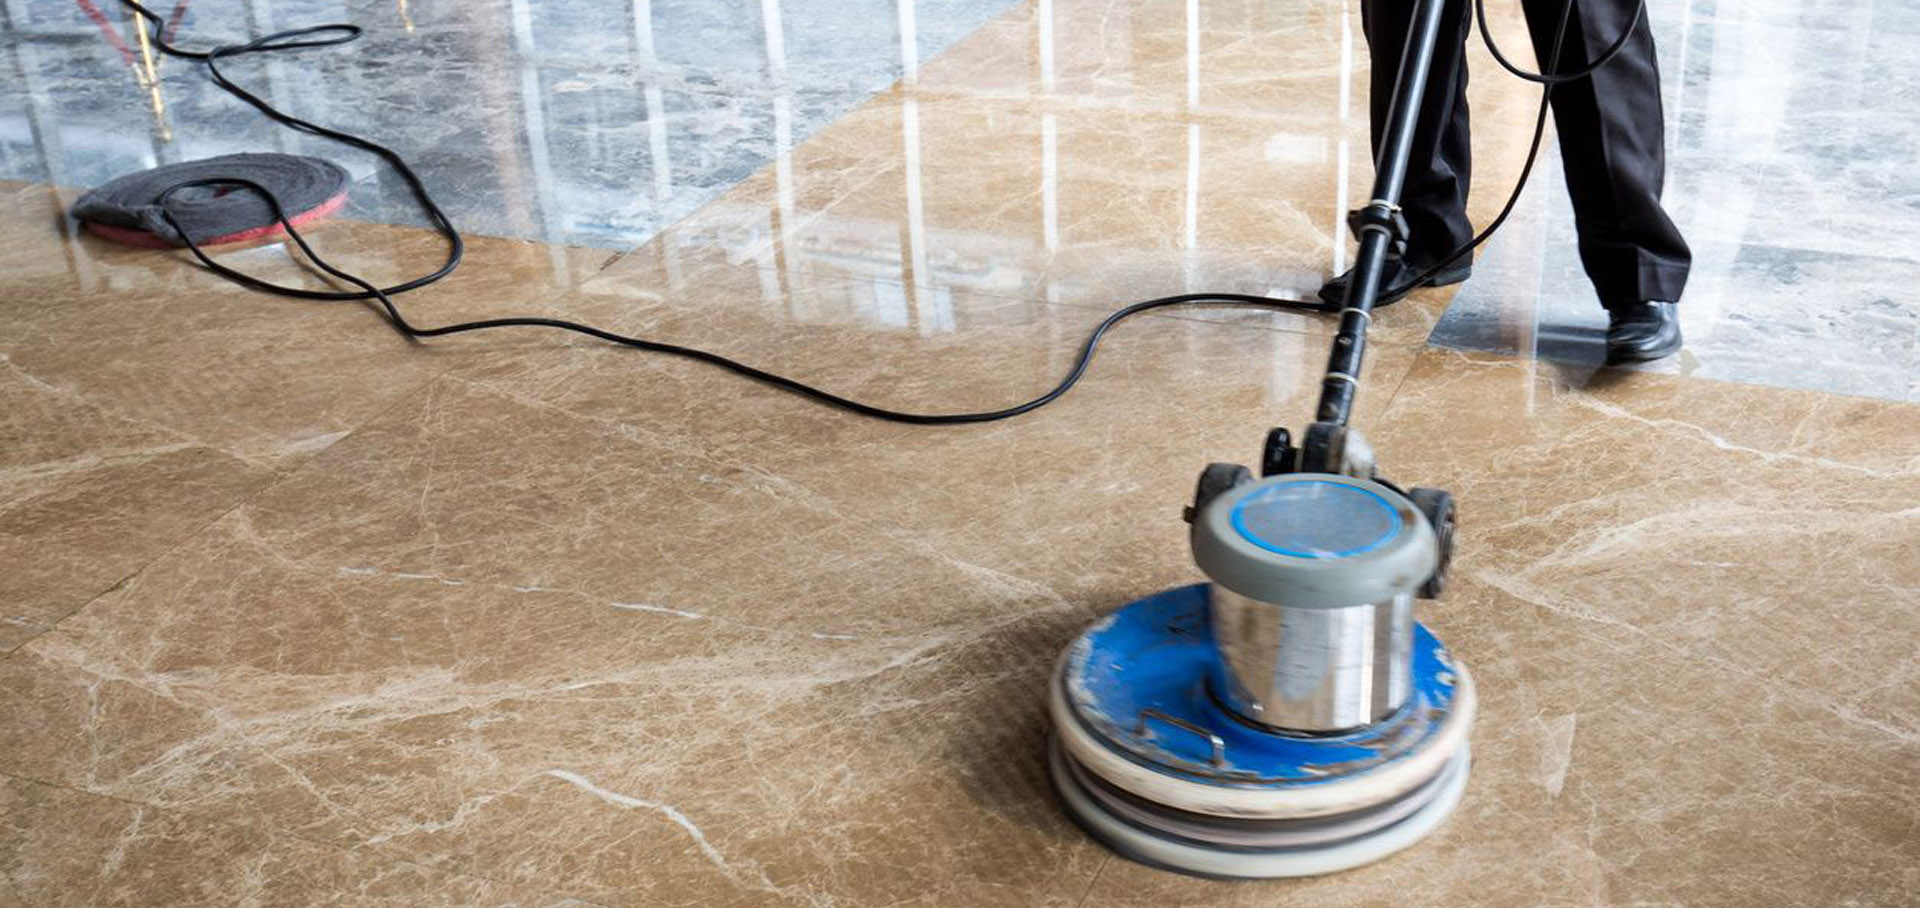 A floor cleaning machine is on the ground.